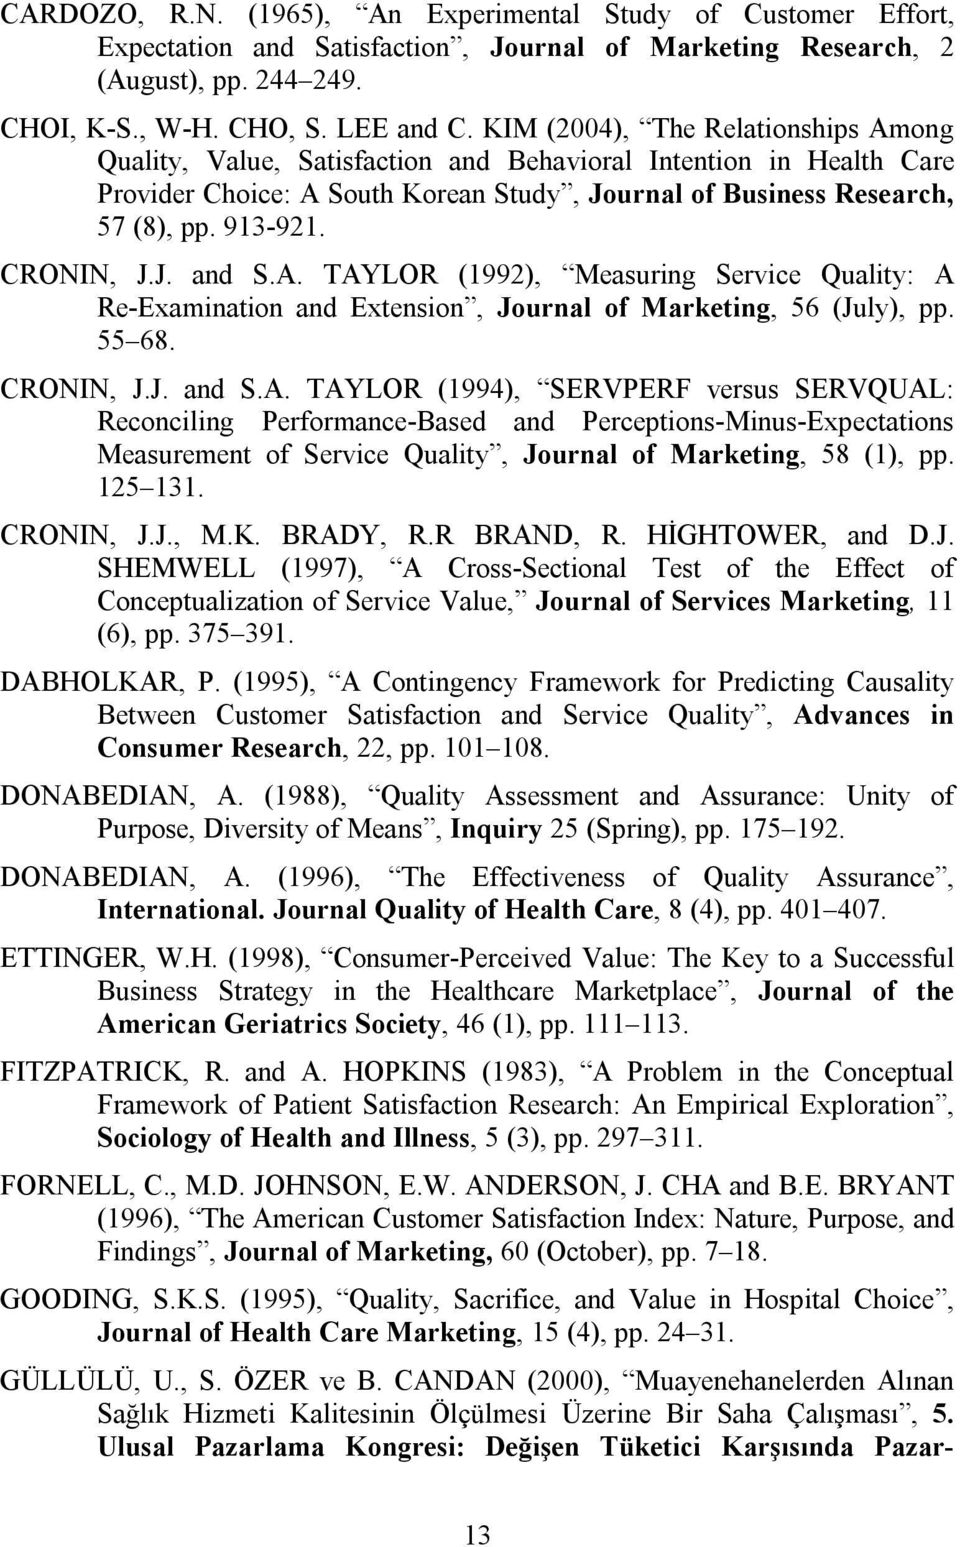 CRONIN, J.J. and S.A. TAYLOR (1992), Measuring Service Quality: A Re-Examination and Extension, Journal of Marketing, 56 (July), pp. 55 68. CRONIN, J.J. and S.A. TAYLOR (1994), SERVPERF versus SERVQUAL: Reconciling Performance-Based and Perceptions-Minus-Expectations Measurement of Service Quality, Journal of Marketing, 58 (1), pp.